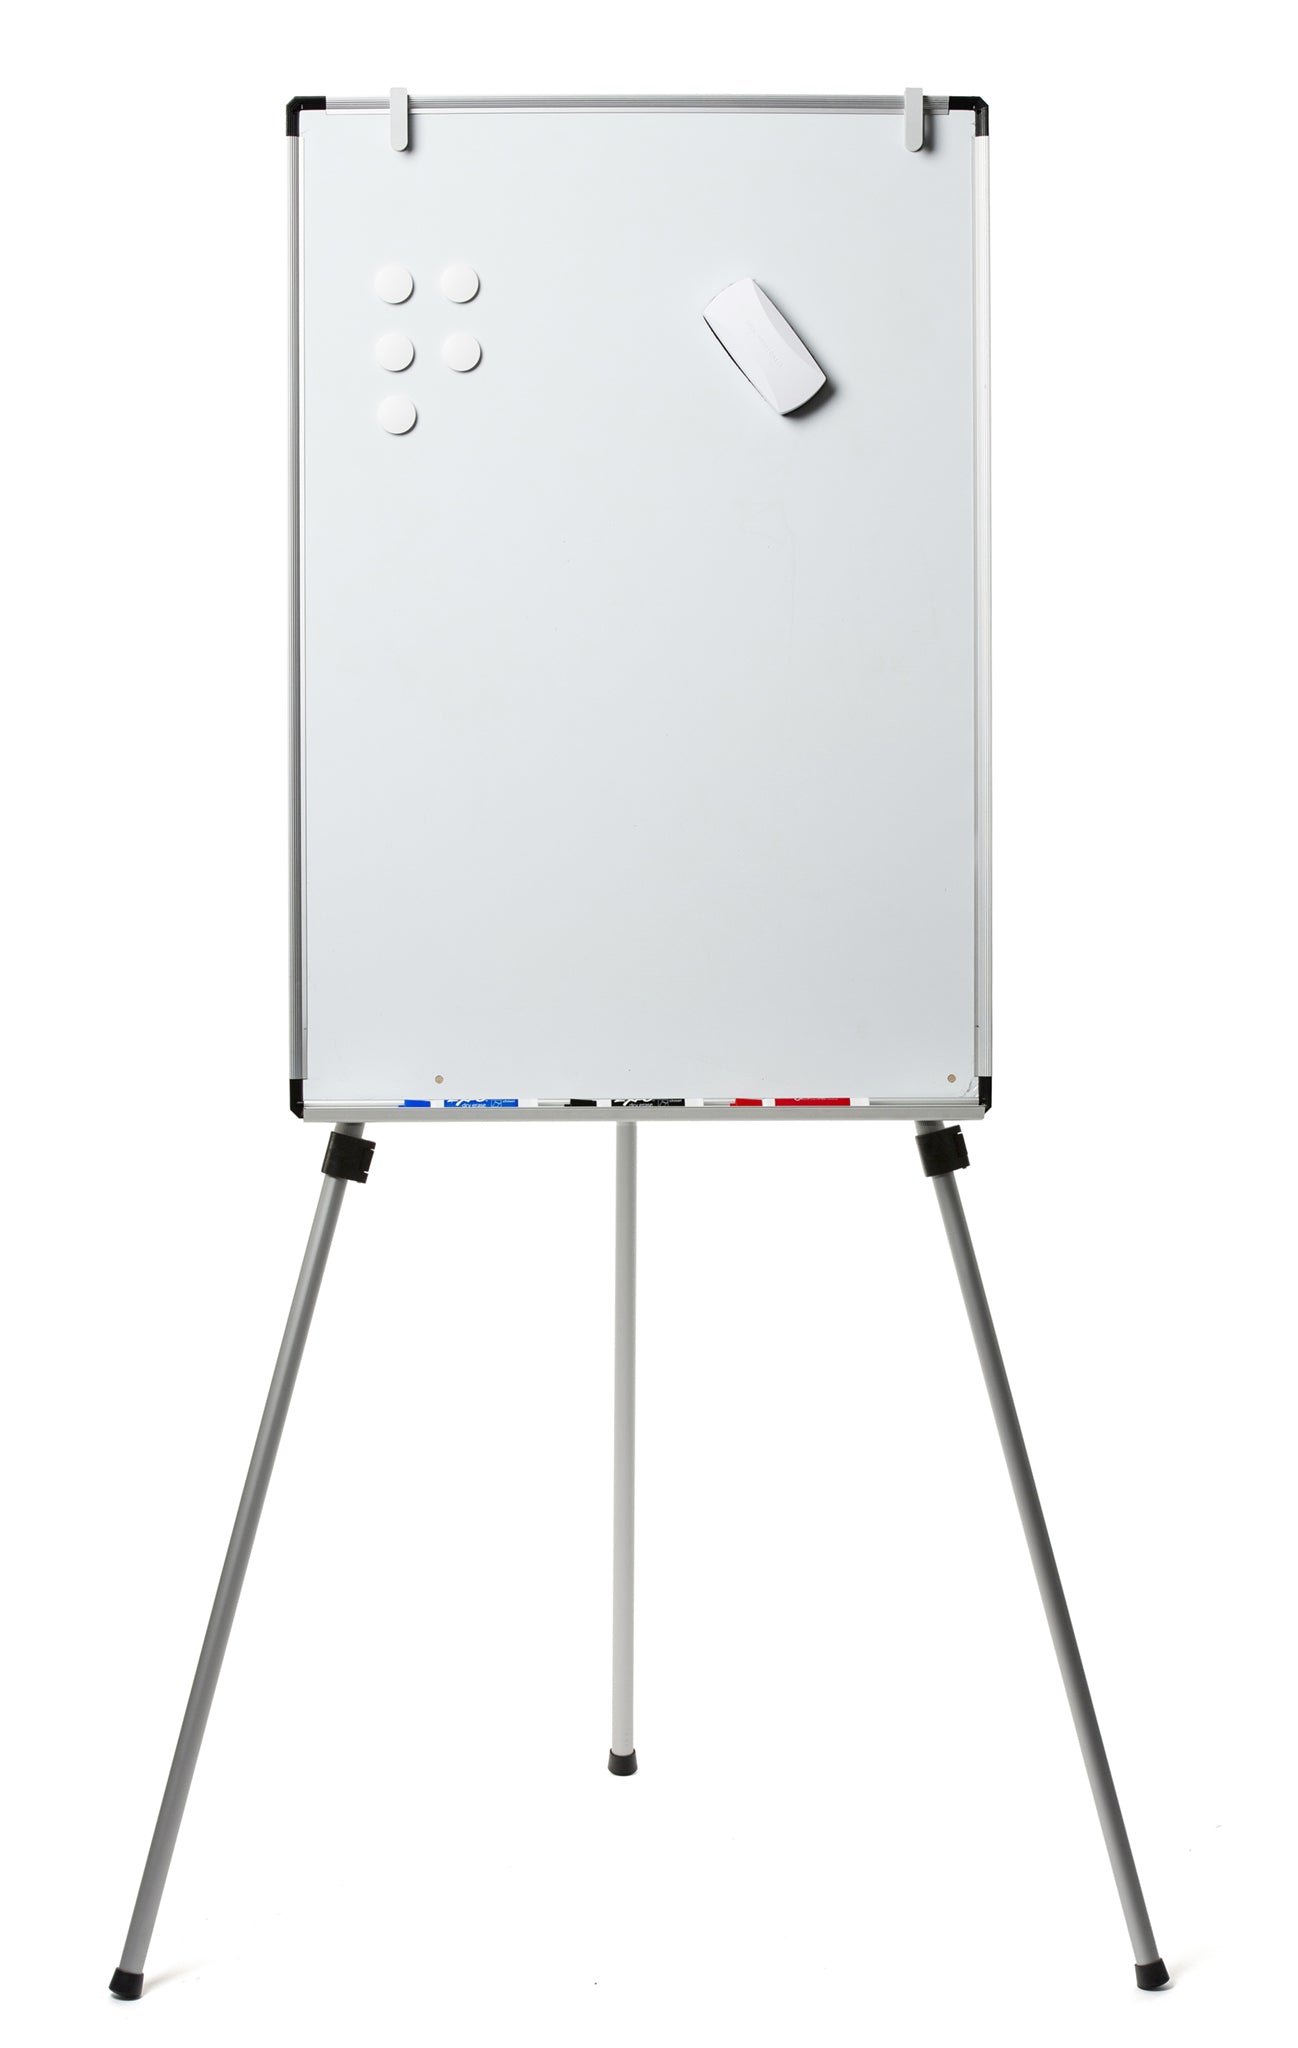 Free Standing White Board. 23" x 34". Shown fully extended with two pad holders on top of frame. 